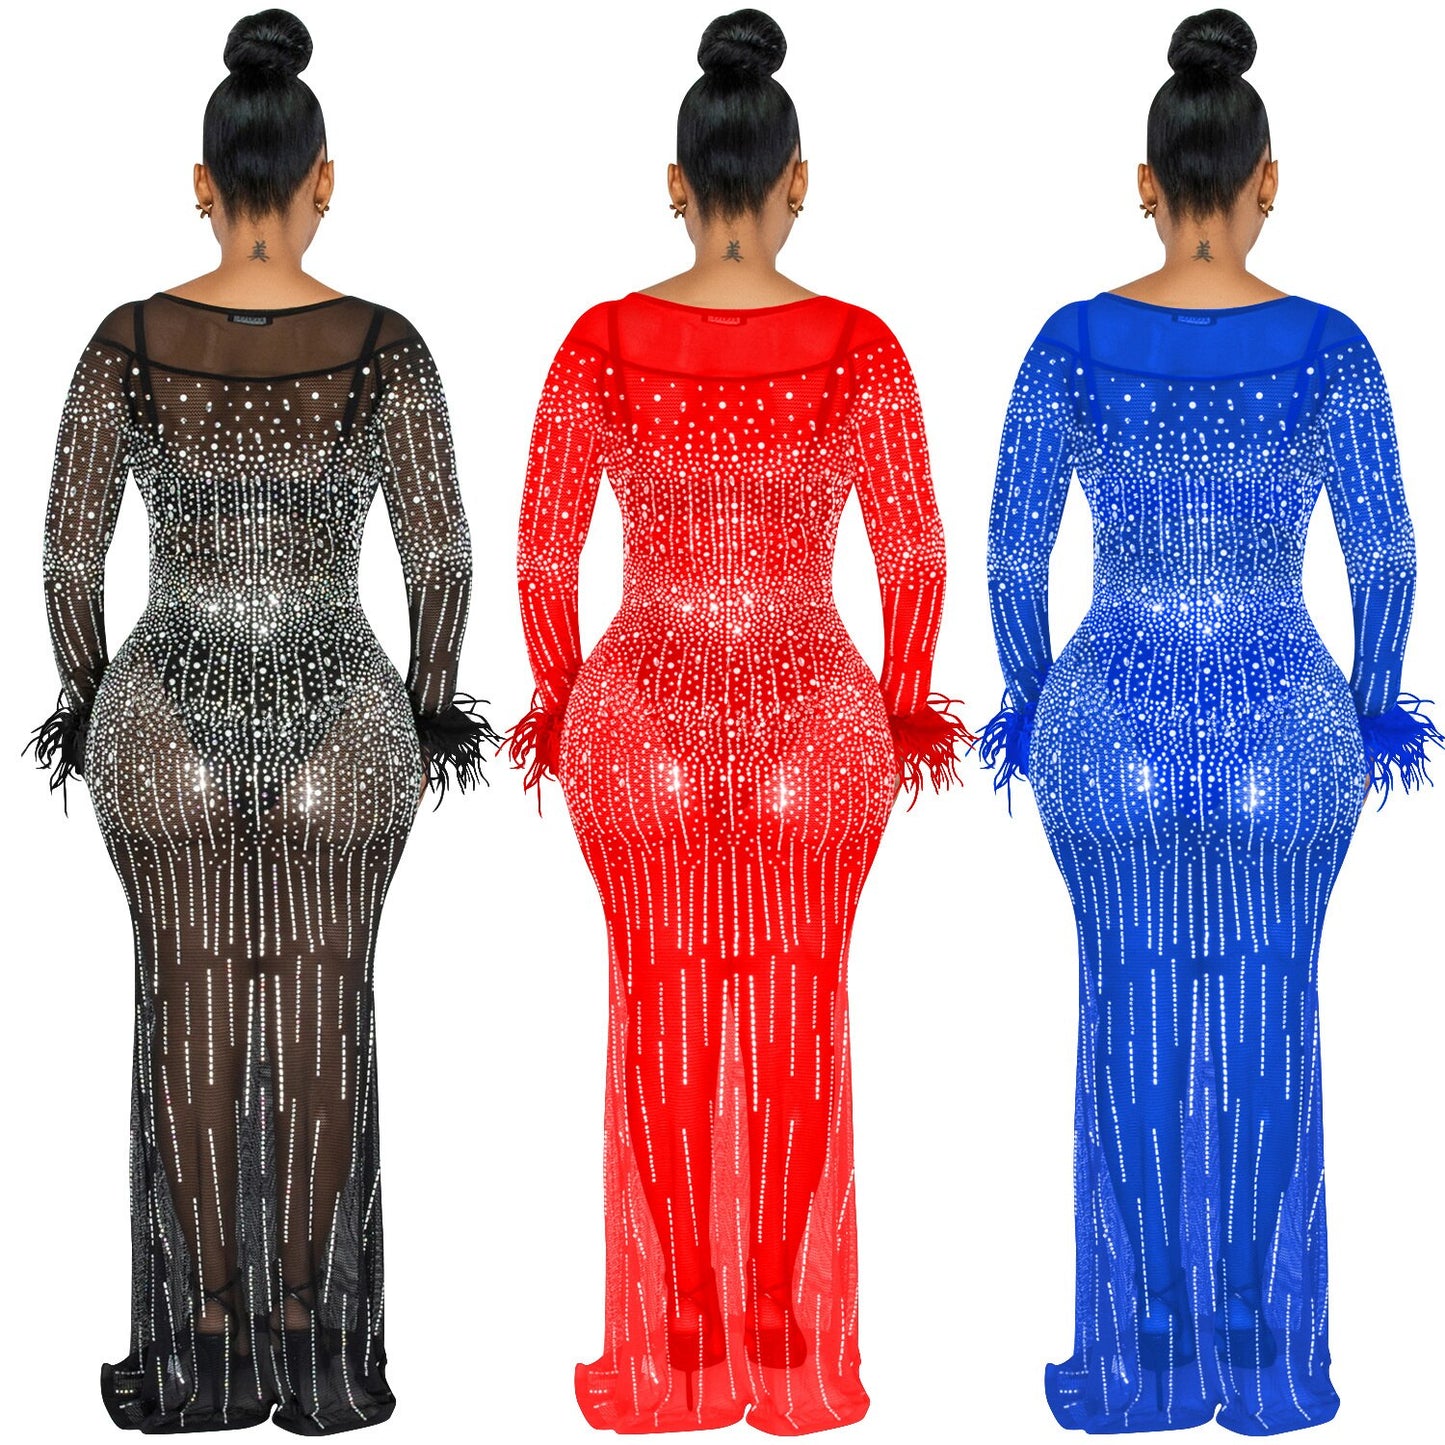 Zoctuo Birthday Dress For Women Elegant Dresses Glitter Rhinestone Mesh See Through Floor Length Maxi Party Club Street Outfits